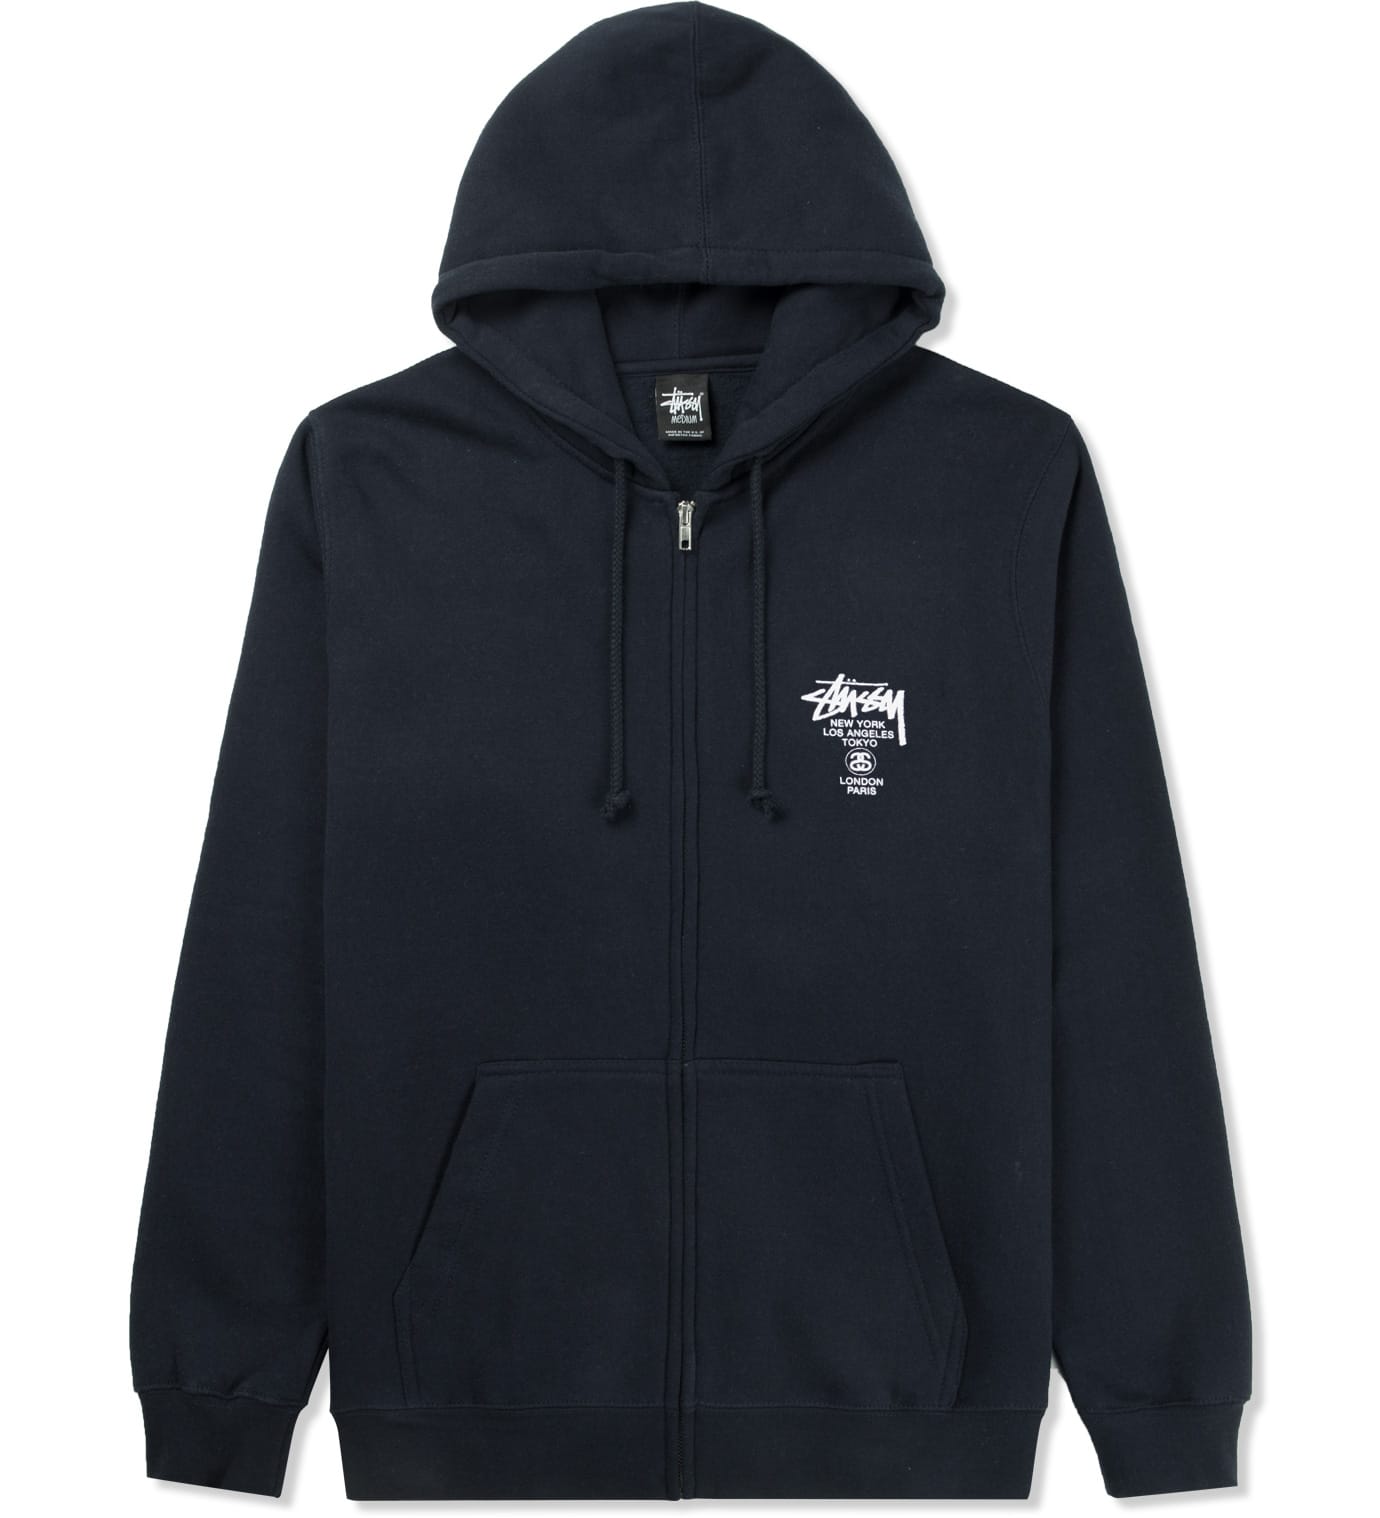 Stüssy - Navy World Tour Zip Hoodie | HBX - Globally Curated 